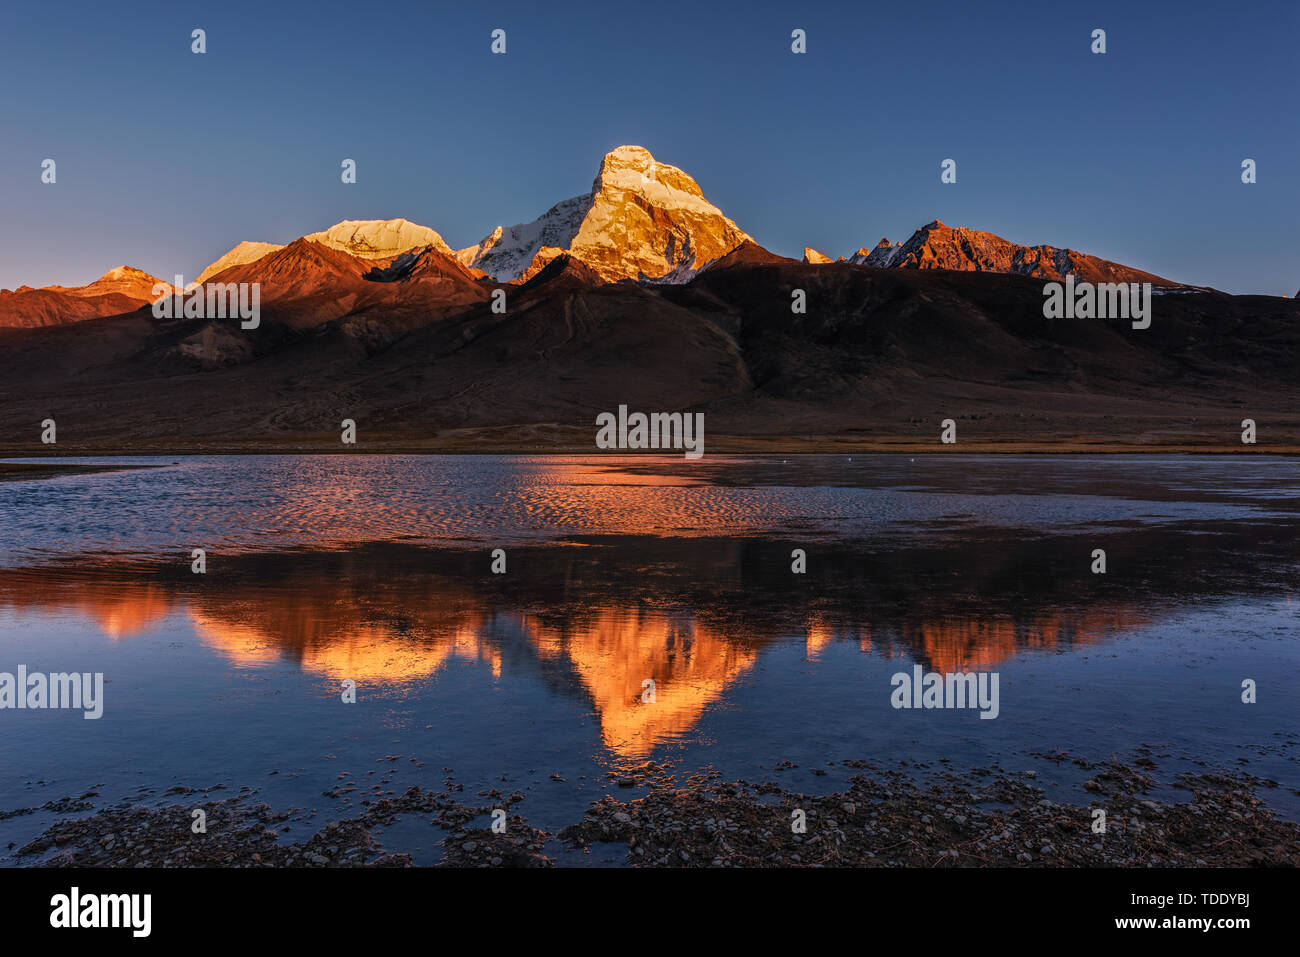 Filmed near the affectionate coo in Tibet, Zhuomu Razi, also known as the Divine Woman Peak, beautiful Jinshan and reflection, different angles. Stock Photo